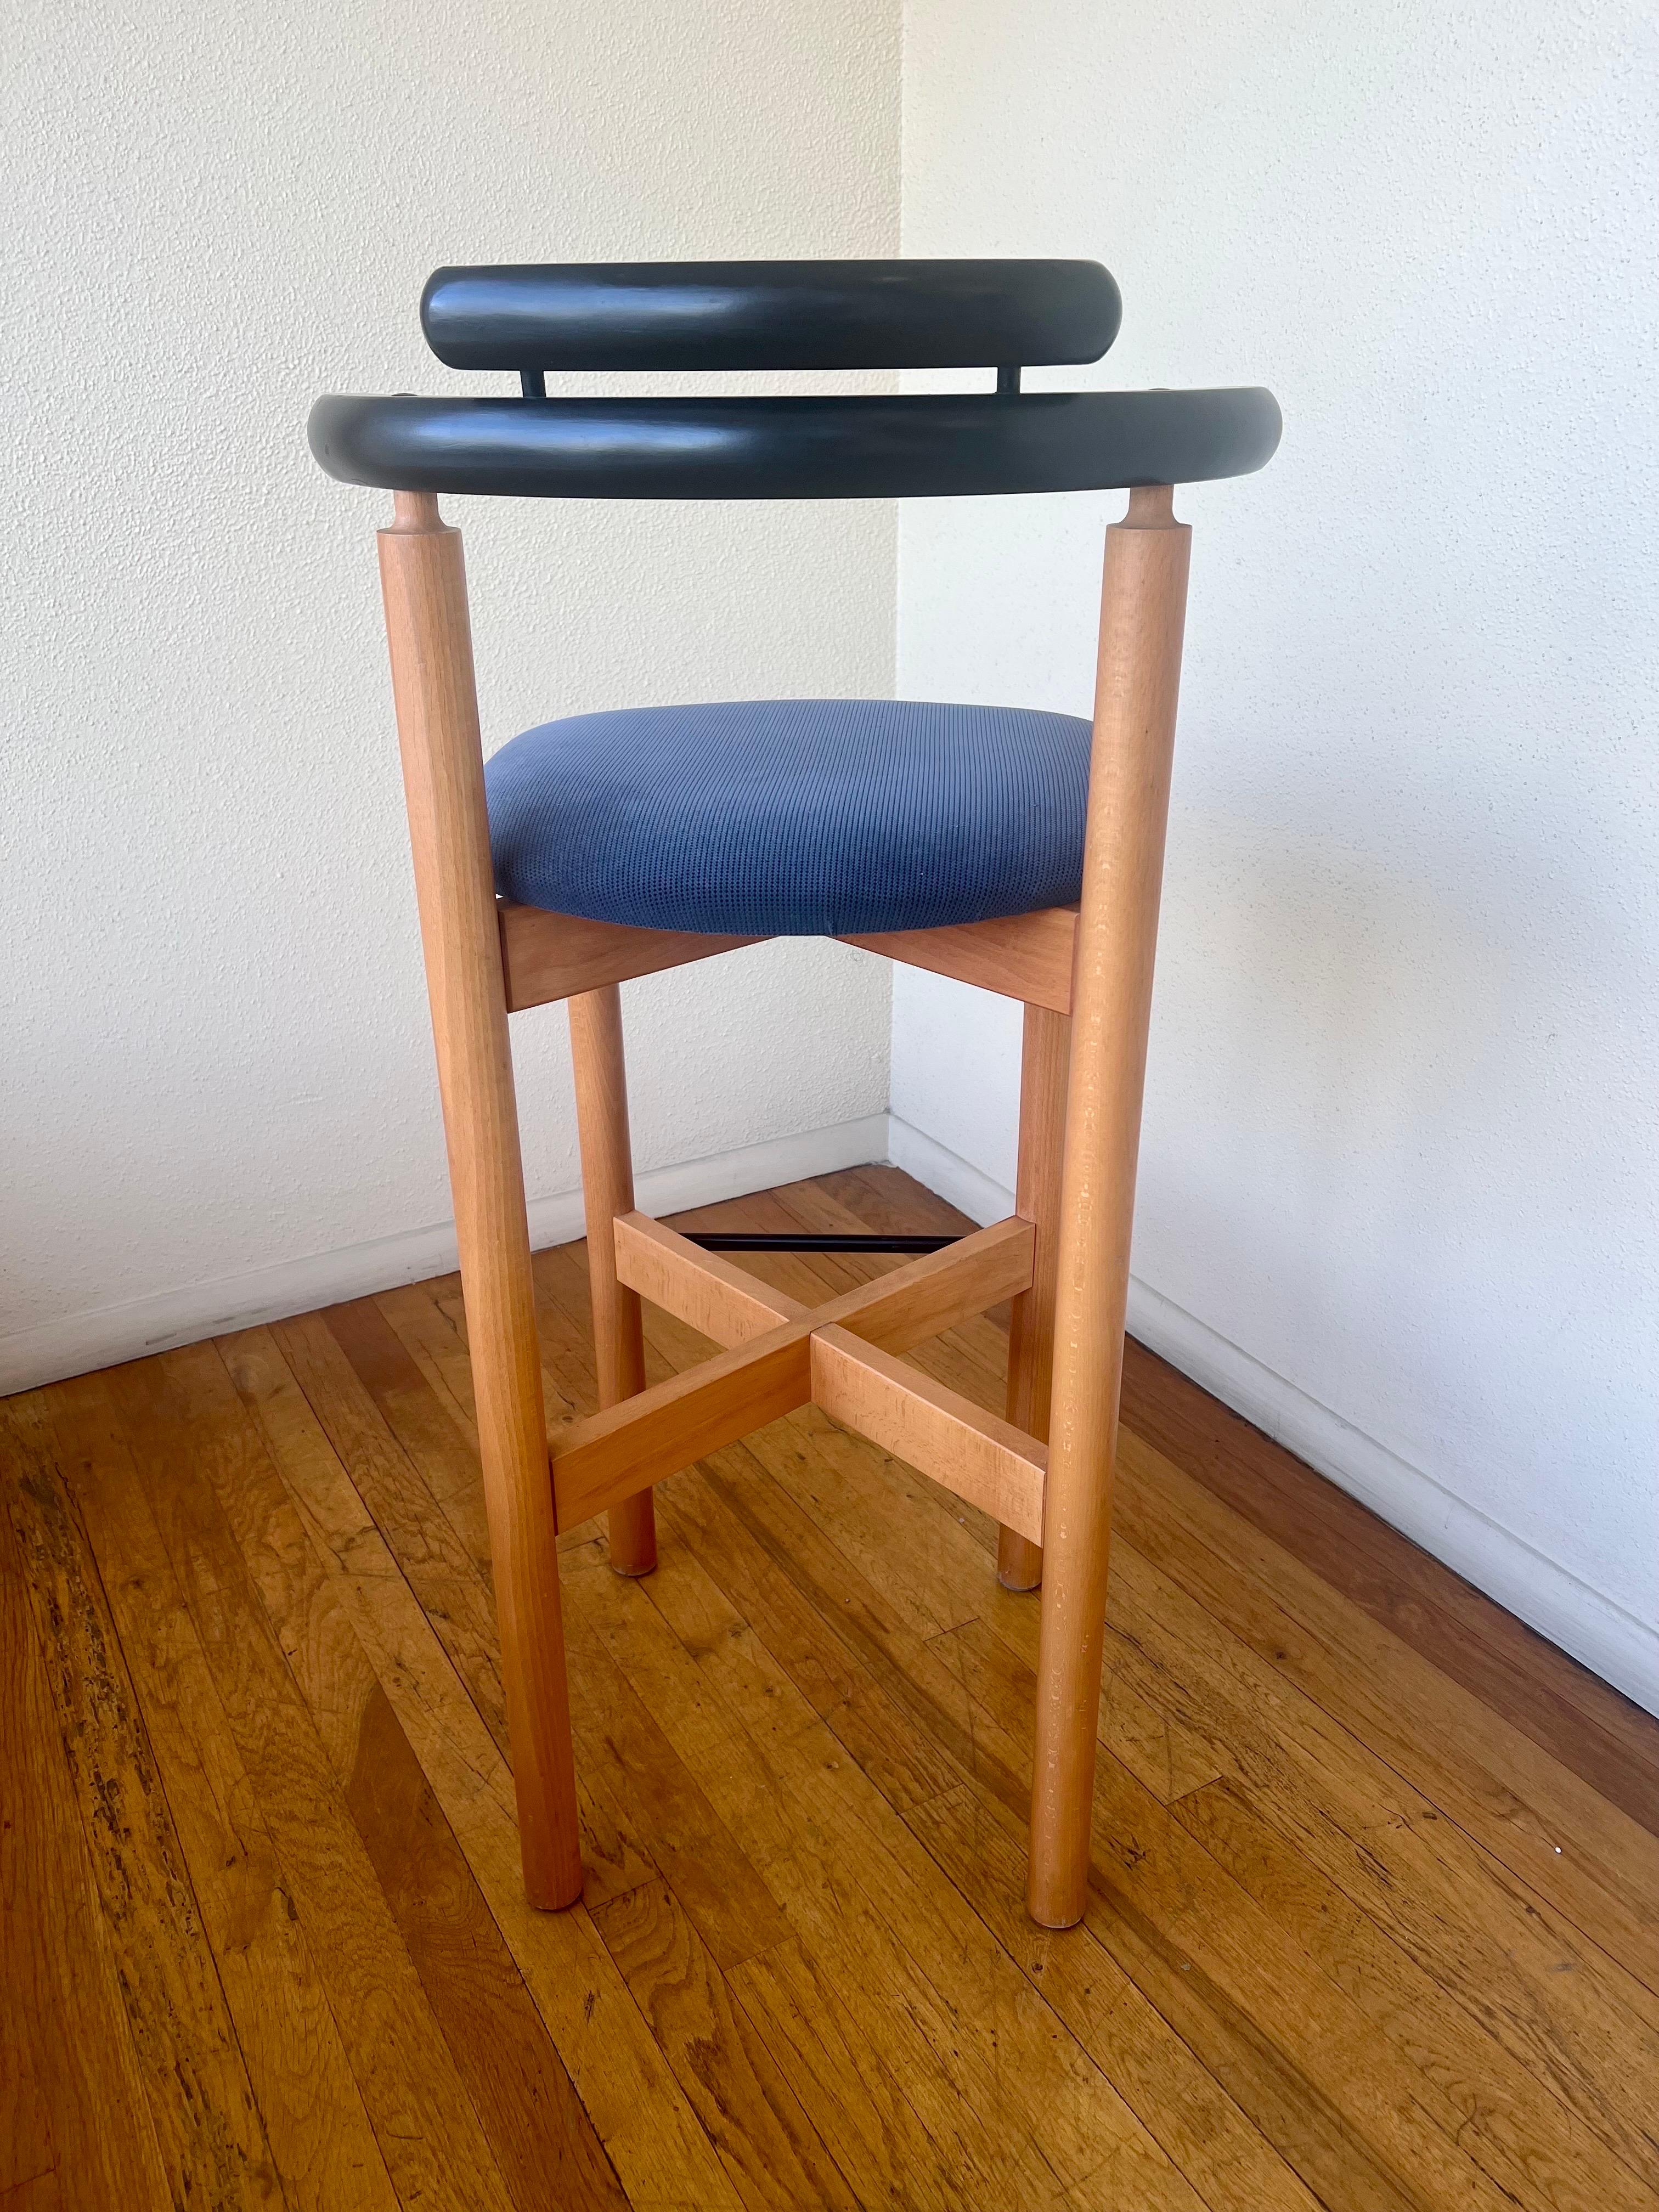 Upholstery Pair of solid Birch & Black Lacquer Wood Danish Postmodern Barstools by Findahls For Sale